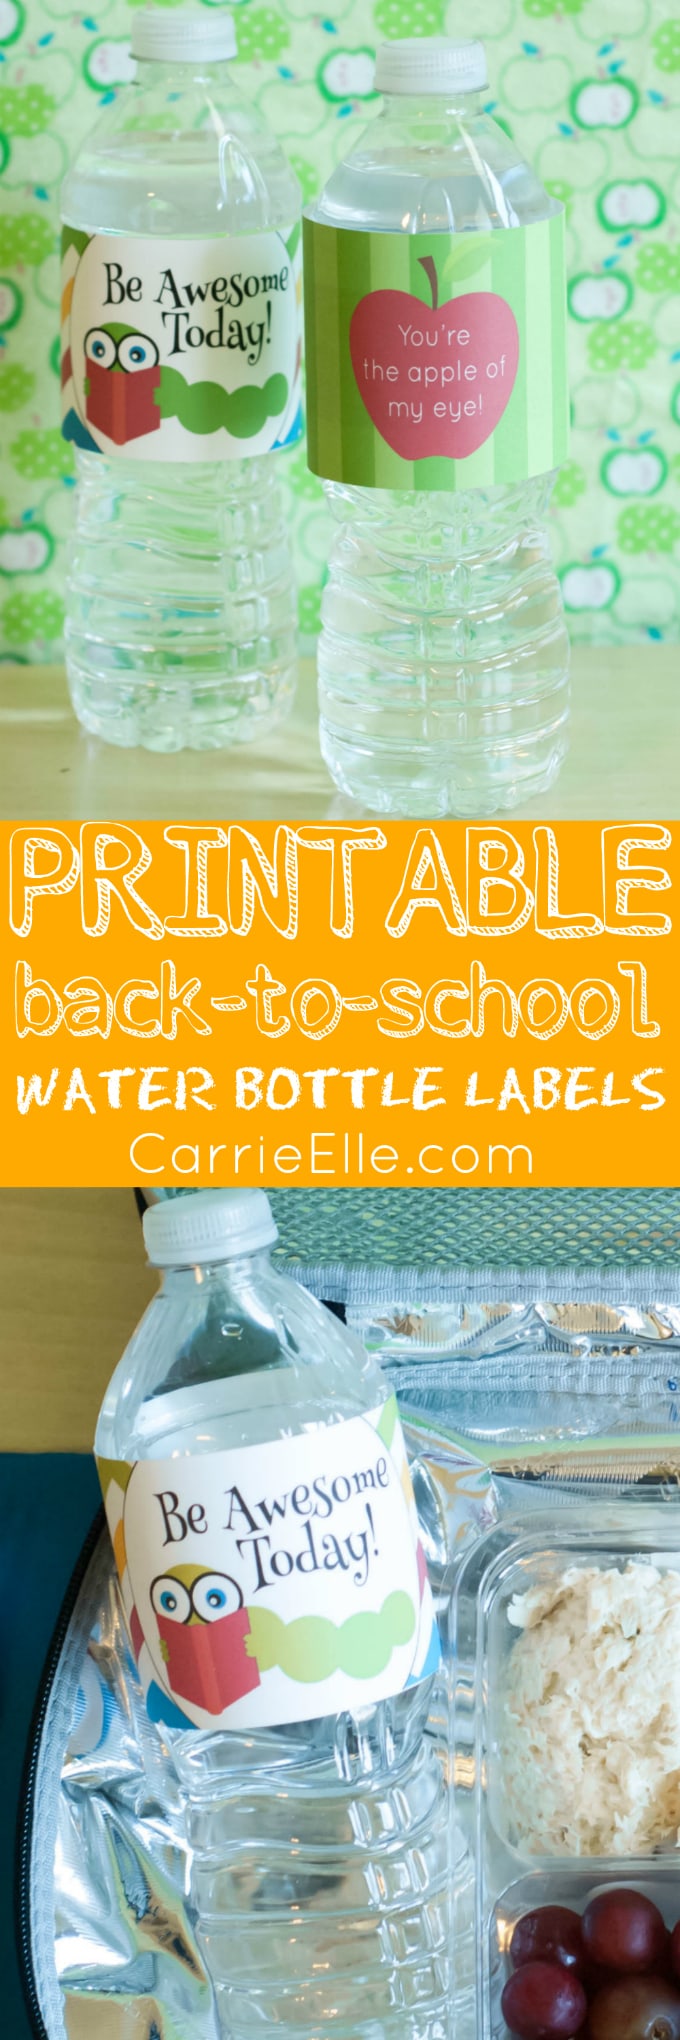 Printable Back-to-School Water Bottle Labels